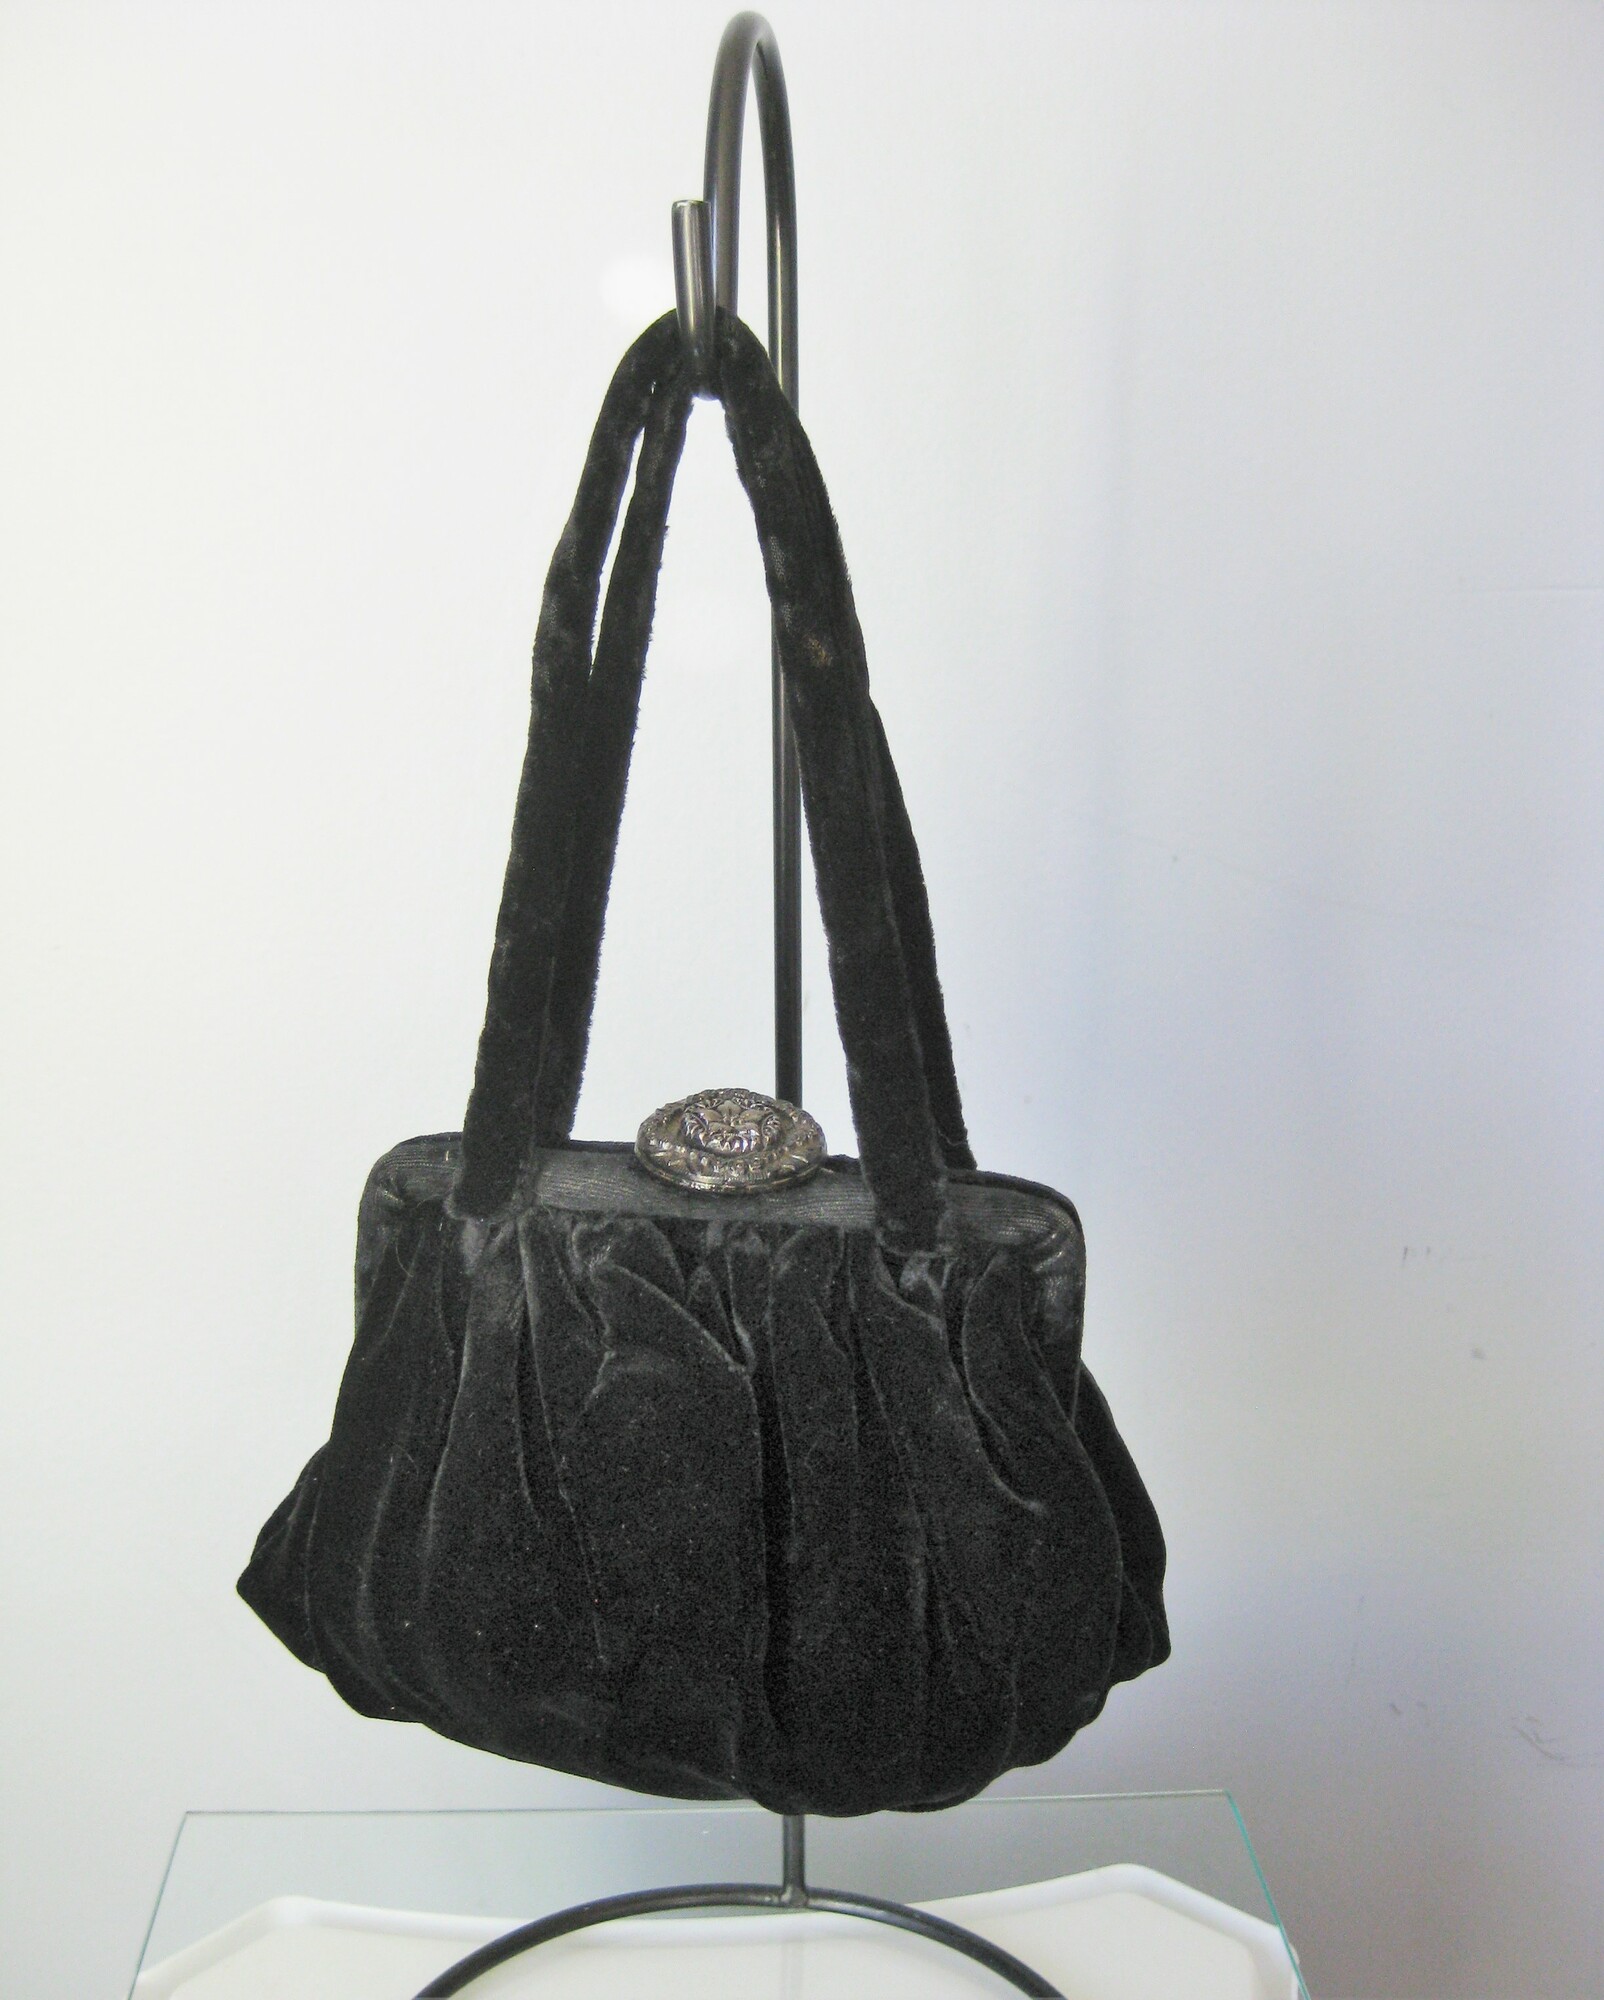 Antique Velvet Frame Clos, Black, Size: None
Simple velvet evening purse in black velvet.
Frame opens wide. Big enough to hold your phone and other essentials.
Pretty squishy shape with gorgeous statement round tilt clasp , embossed with leaves.
Two handles
Faille lining
Most phones will fit, mine is aobut 6x4 and it fits.
Great condition with a bit of shine on the velvet handles.

6.5 x 6.5 , unstructured, flat when empty

Thanks for looking!
#51103